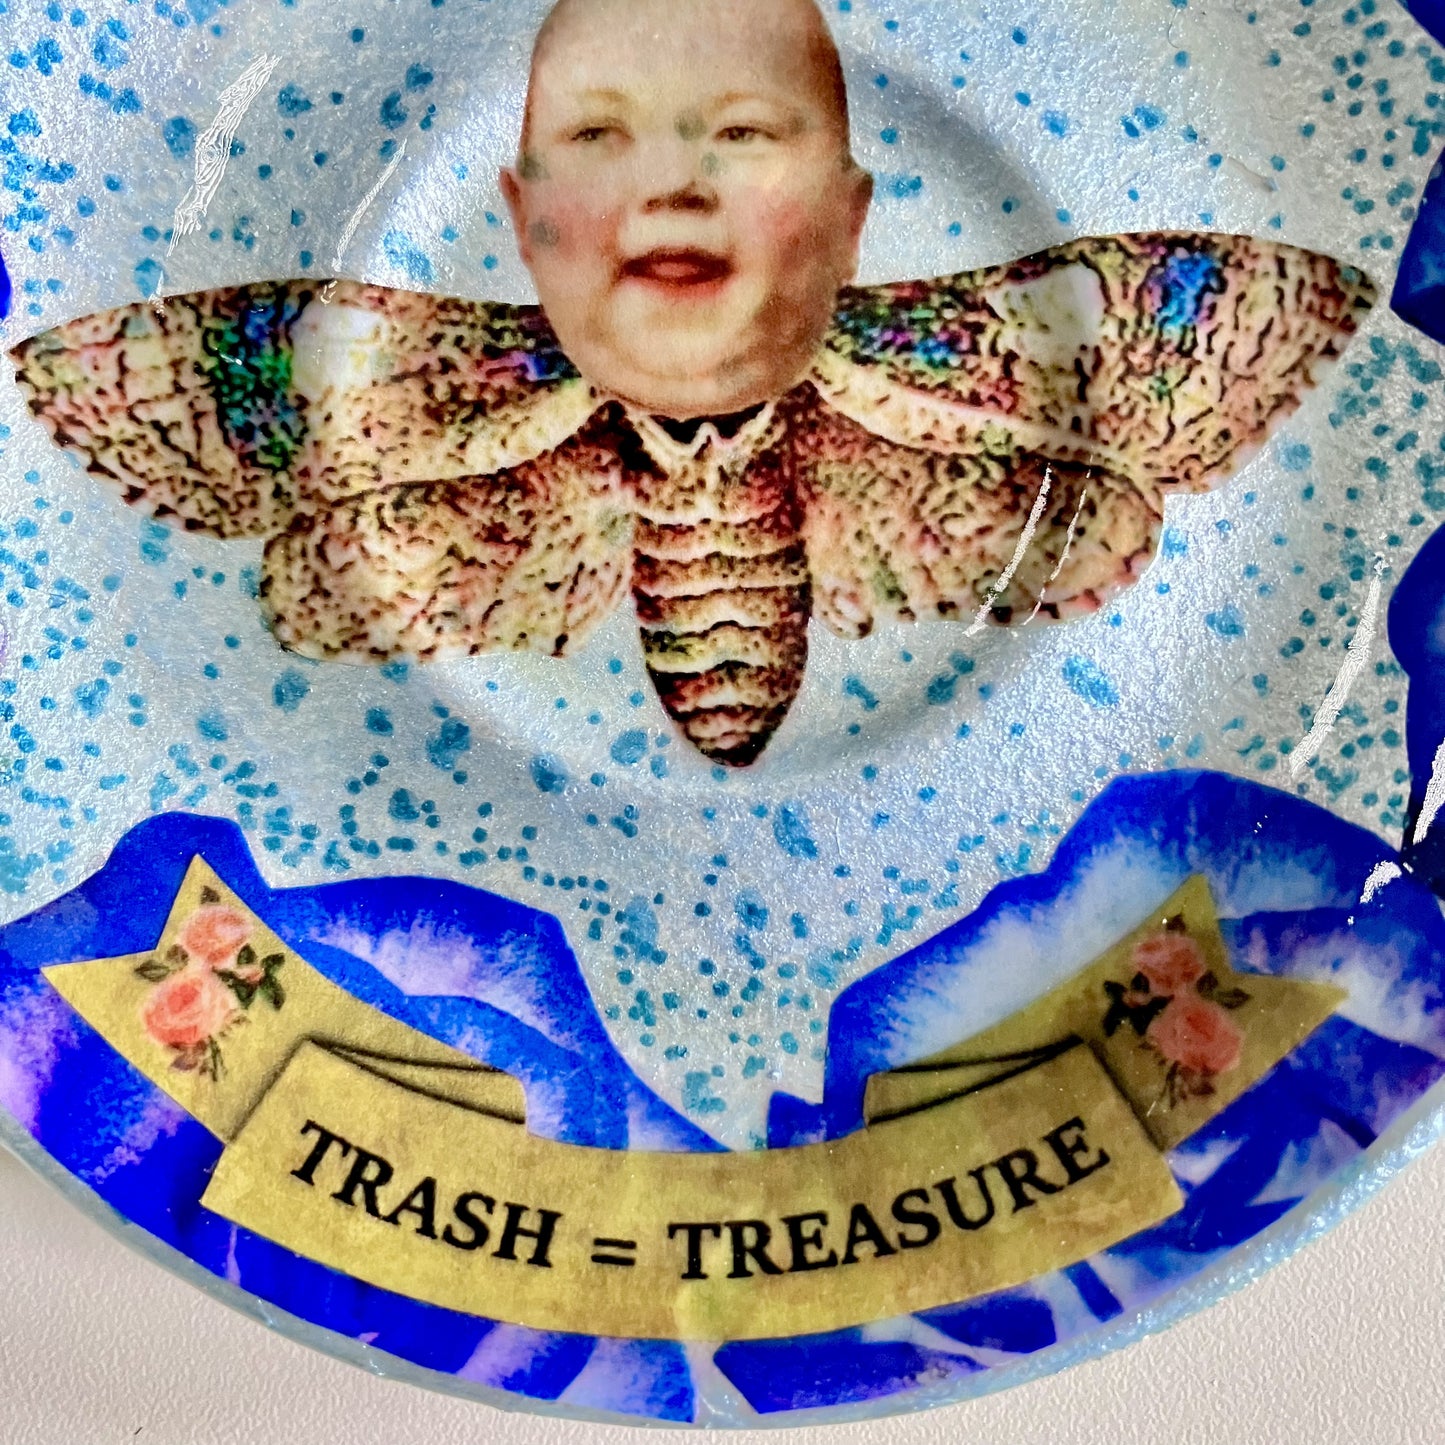 "Trash = Treasure" Trinket Dish by House of Frisson. Featuring a collage of a moth with a doll head, framed with blue roses. Closeup detail.